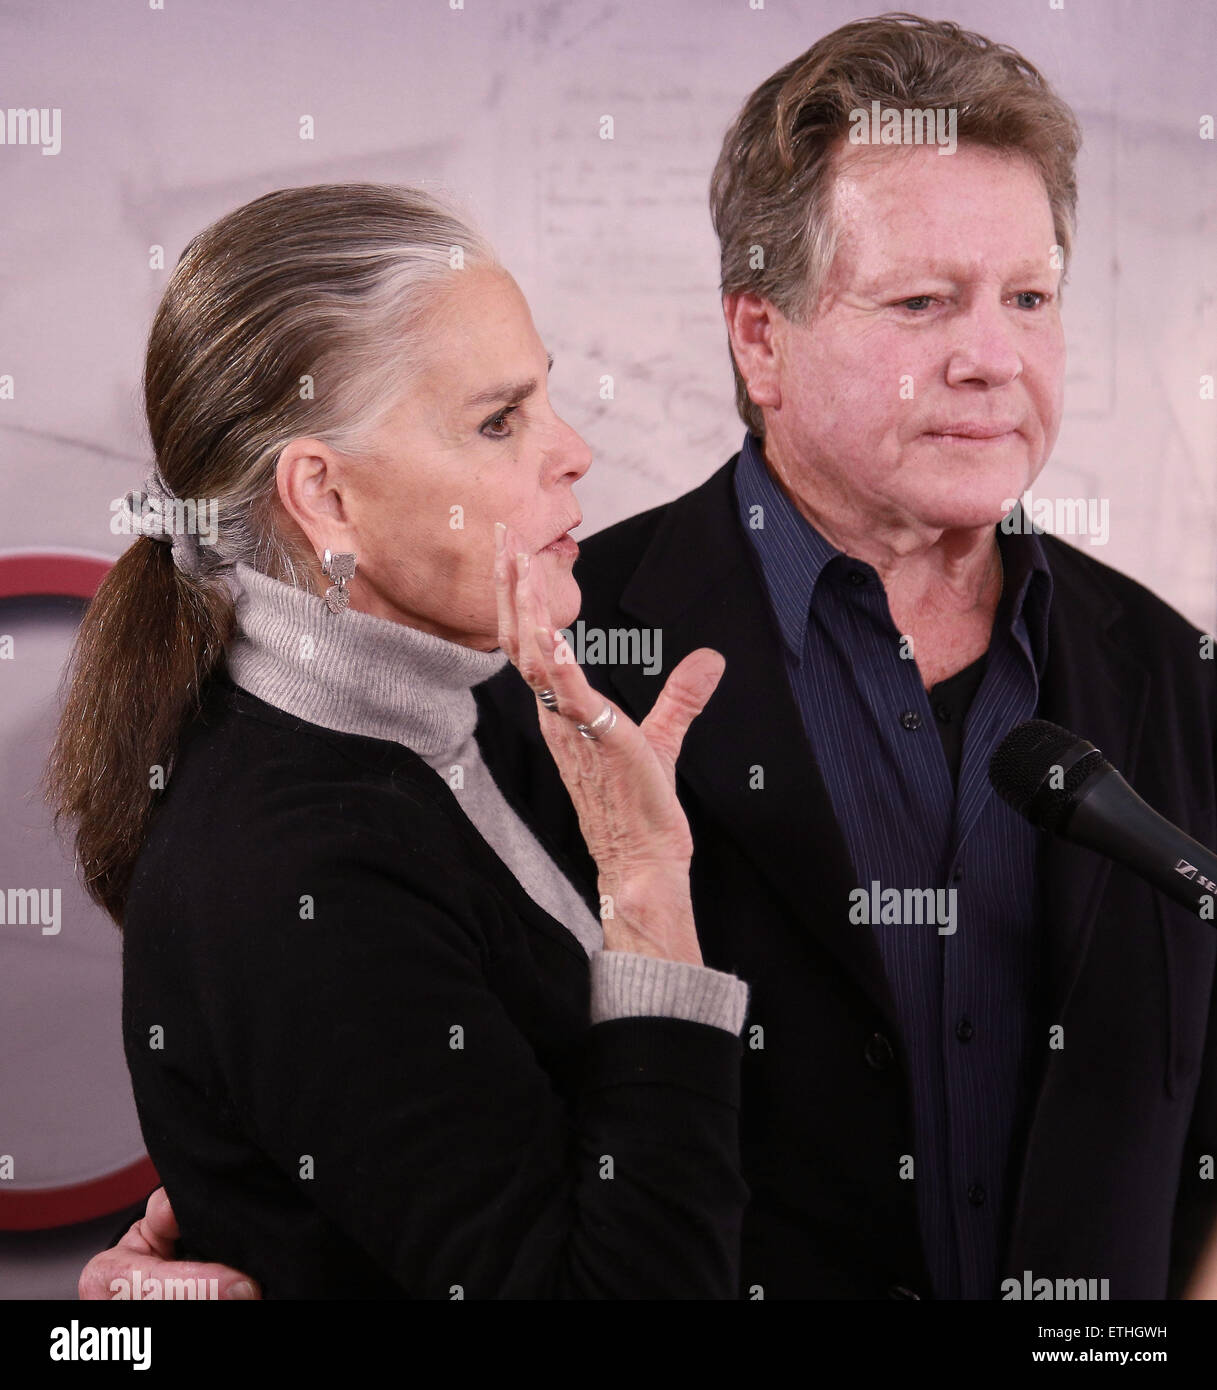 The stars of the 1970 film Love Story reunite during rehearsals for the upcoming tour production of Love Letters, at Shetler Studios.  Featuring: Ali MacGraw, Ryan O'Neal Where: New York, New York, United States When: 24 Feb 2015 Credit: Joseph Marzullo/WENN.com Stock Photo